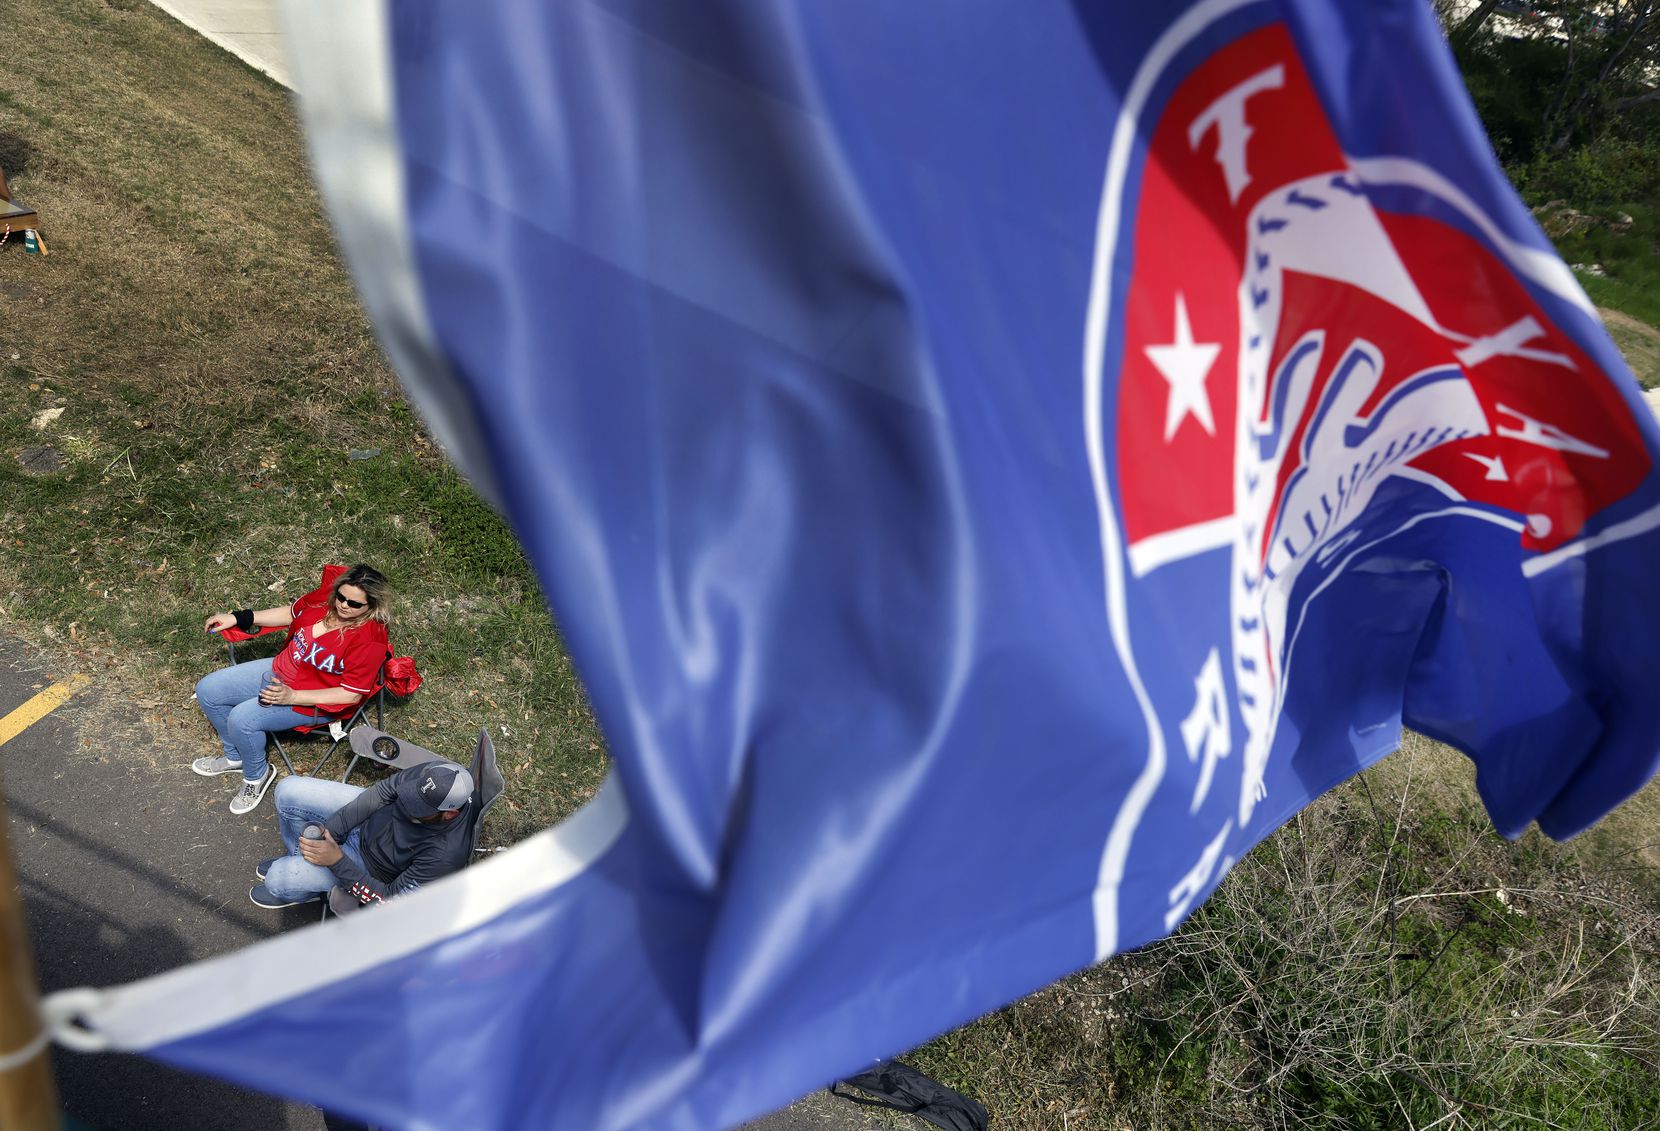 Texas Rangers fans enjoy an Opening Day tailgate party on private property outside of Globe Life Field in Arlington, Monday, April 5, 2021. The Rangers are facing the Toronto Blue Jays in the home opener. (Tom Fox/The Dallas Morning News)